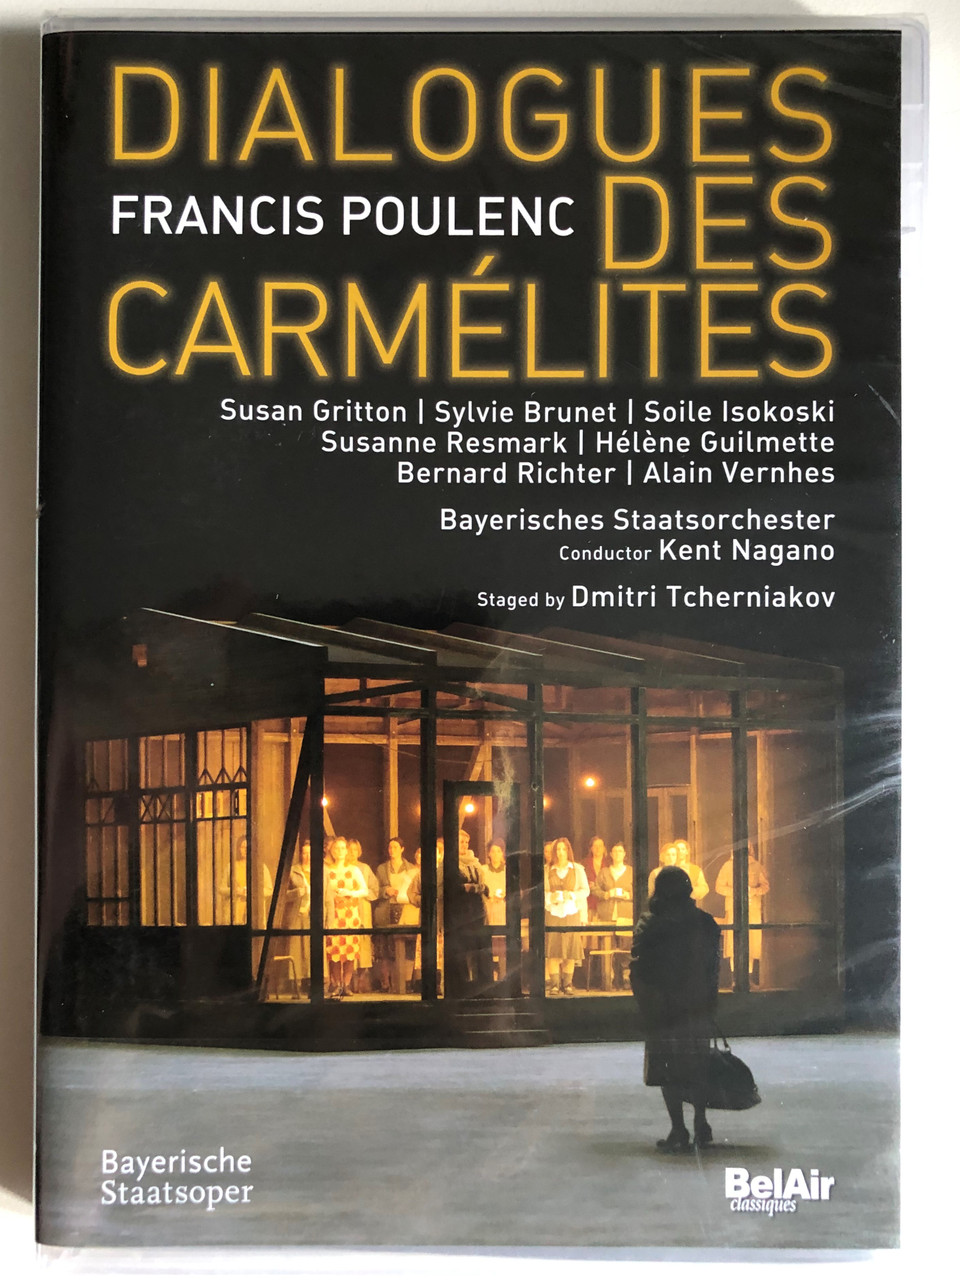 Poulenc_Dialogues_des_Carmelites_Opera_in_three_acts_Libretto_Francis_Poulenc_after_Georges_Bernanos_BAVARIAN_STATE_ORCHESTRA_CHOIR_OF_THE_BAVARIAN_STATE_OPERA_Conductor_KENT___93615.1691663289.1280.1280.JPG (960×1280)